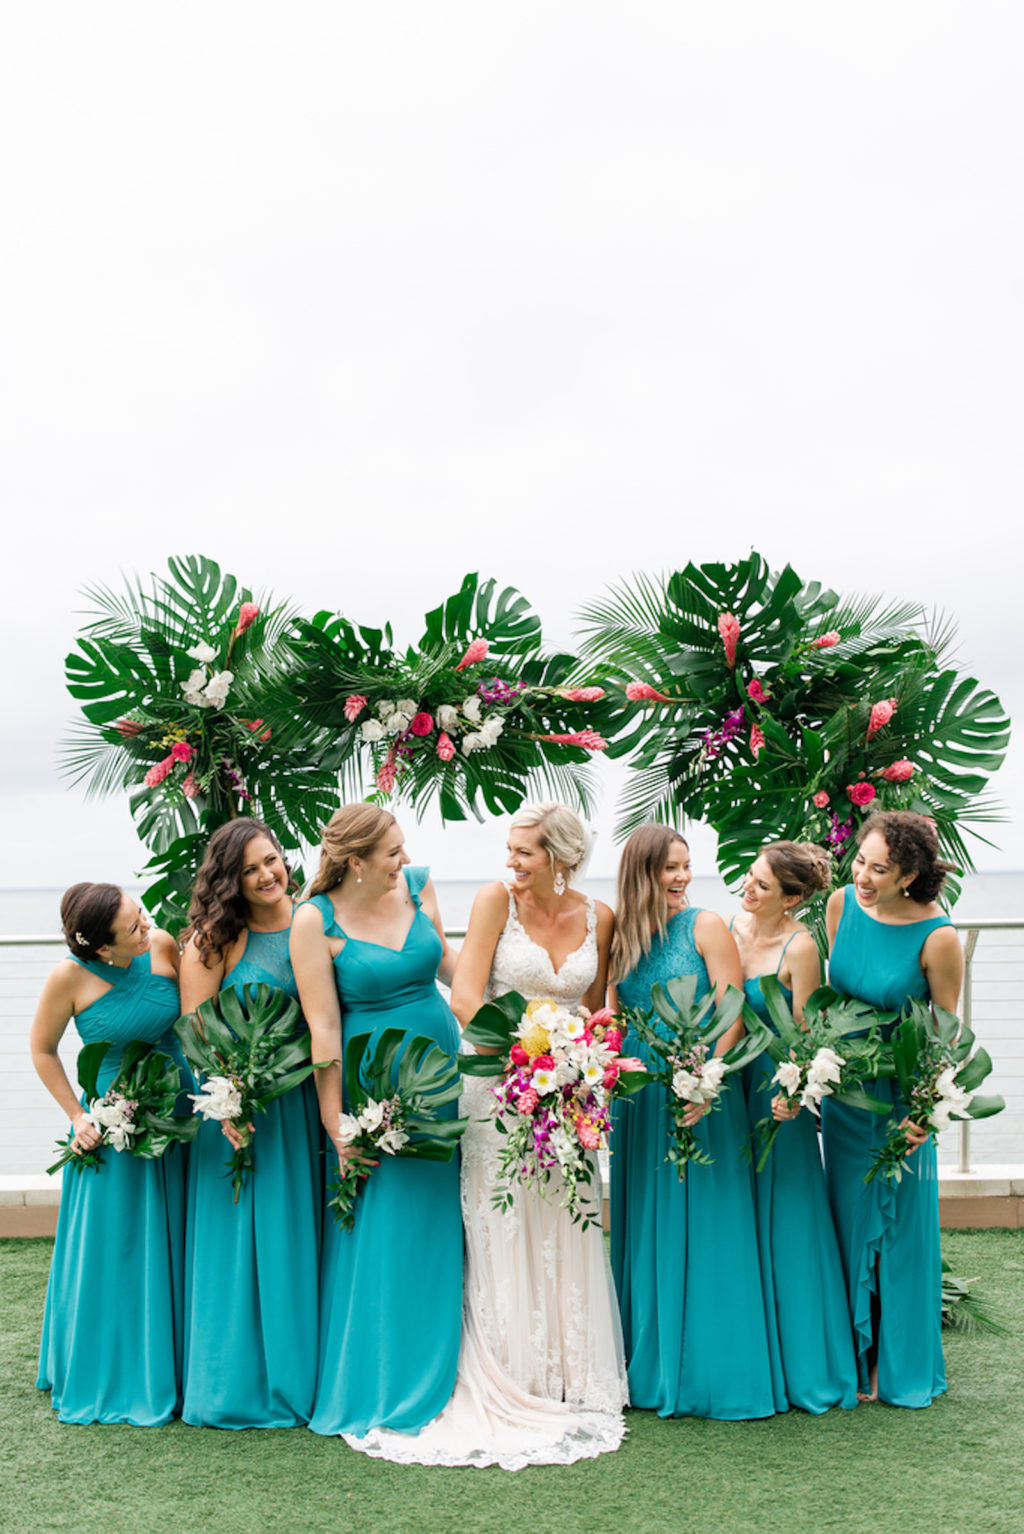 Tropical Elegant Waterfront Bridal Party Photo, Bridesmaids in Mix and Match Teal Dresses, Bride in Lace Wedding Dress Holding Colorful Lush Floral Bouquet, Arch with Monstera Palm Tree Leaves, Pink Ginger, Purple Orchids, White Flowers | Tampa Bay Wedding Planner Special Moments Event Planning